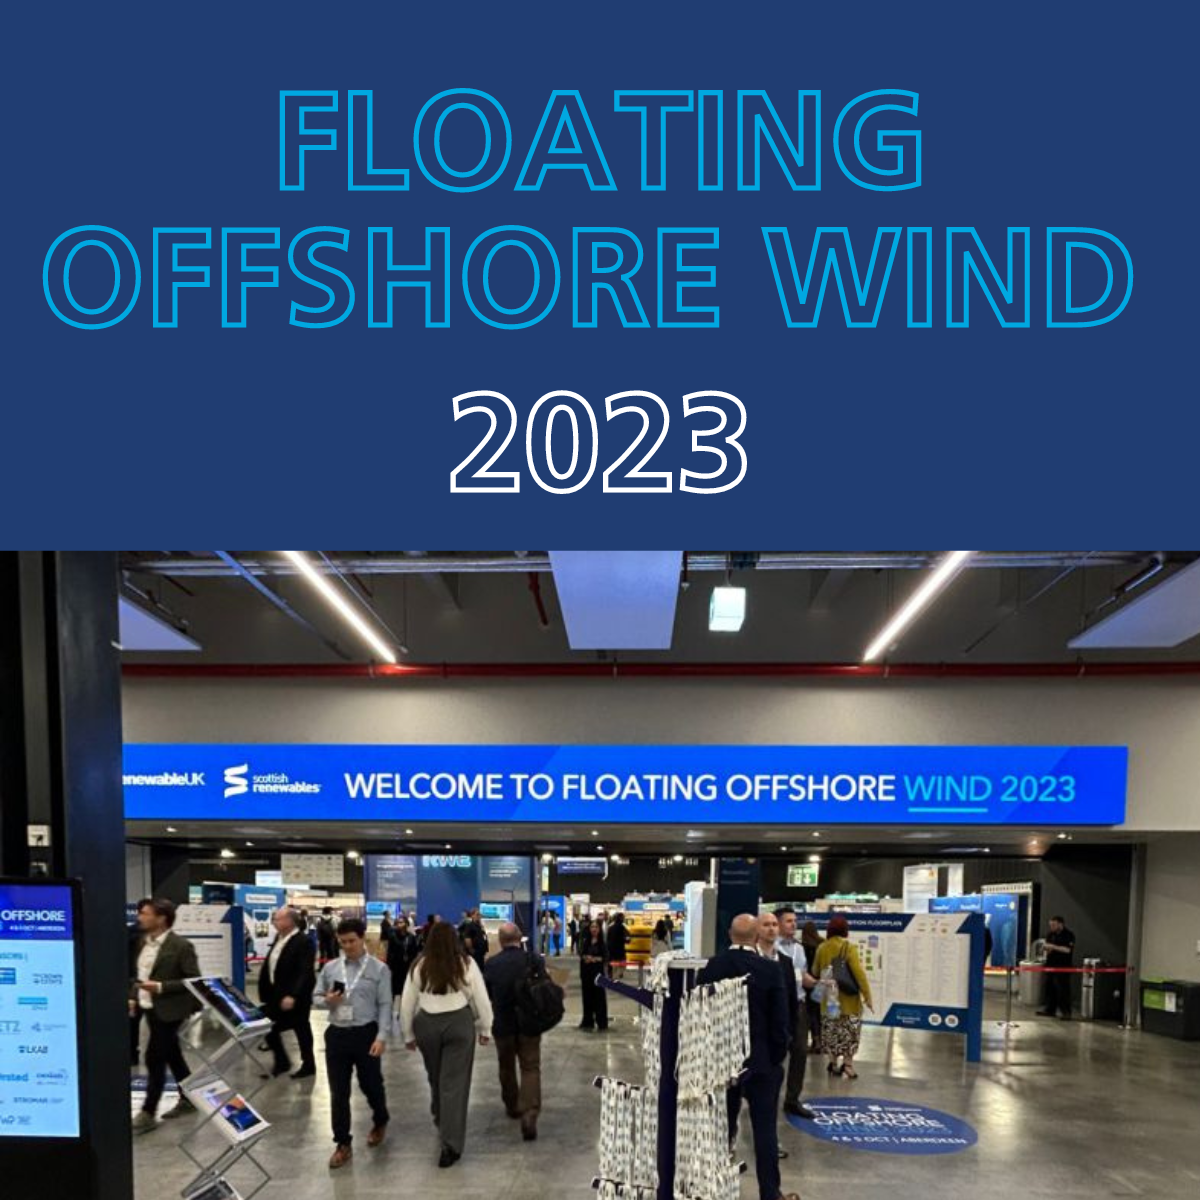 Eemits at the Floating Offshore Wind 2023 Conference